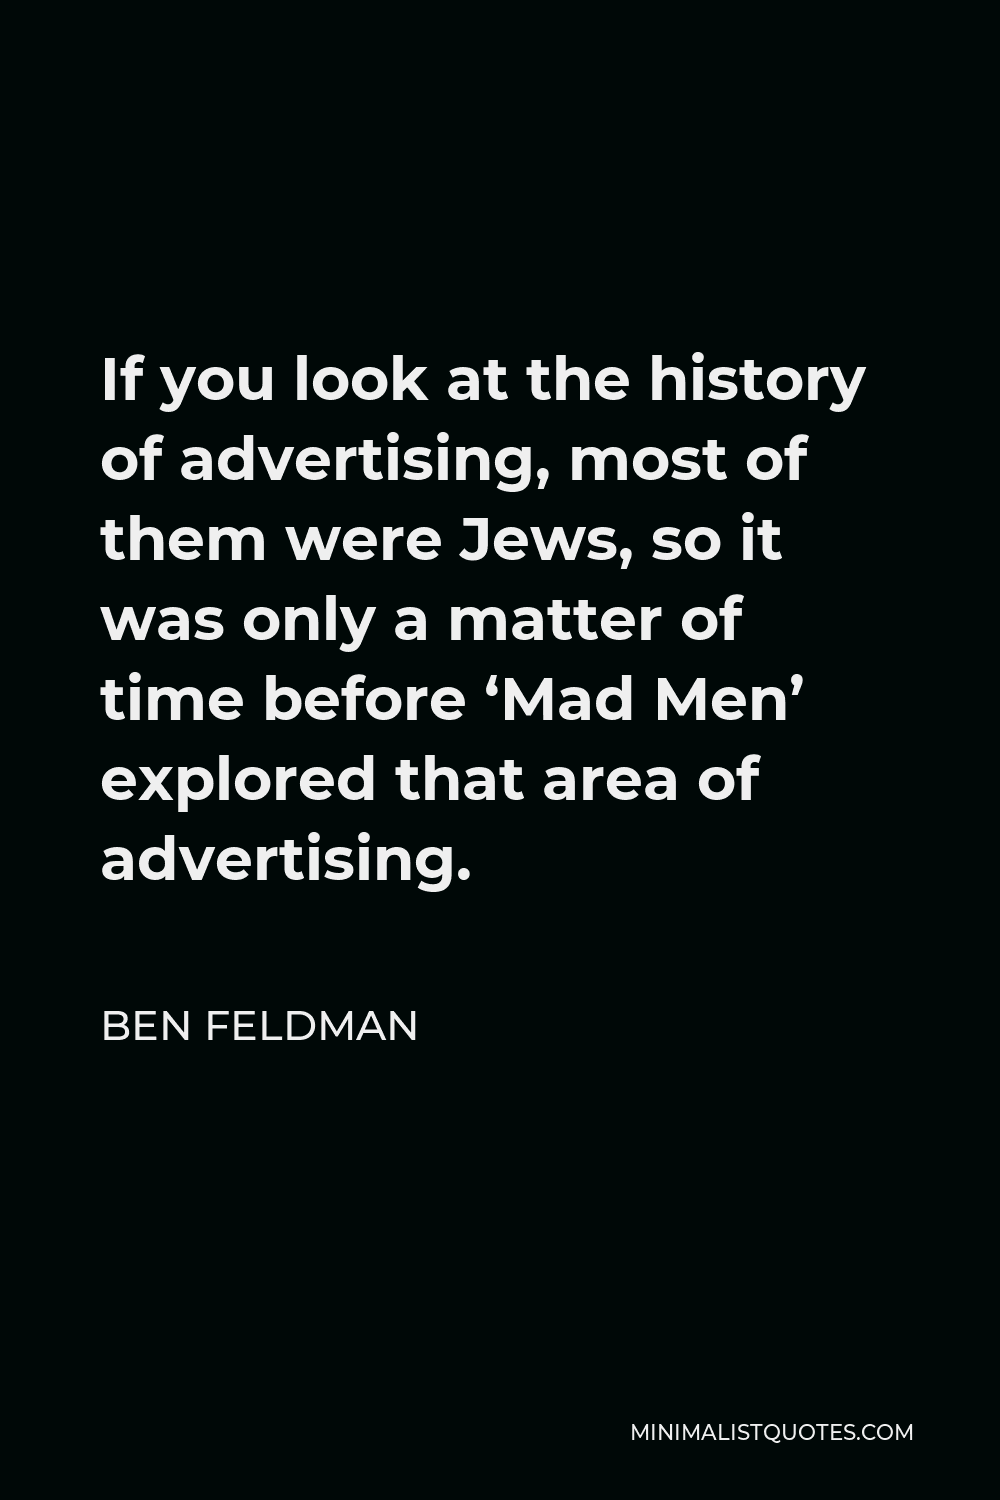 Ben Feldman Quote - If you look at the history of advertising, most of them were Jews, so it was only a matter of time before ‘Mad Men’ explored that area of advertising.